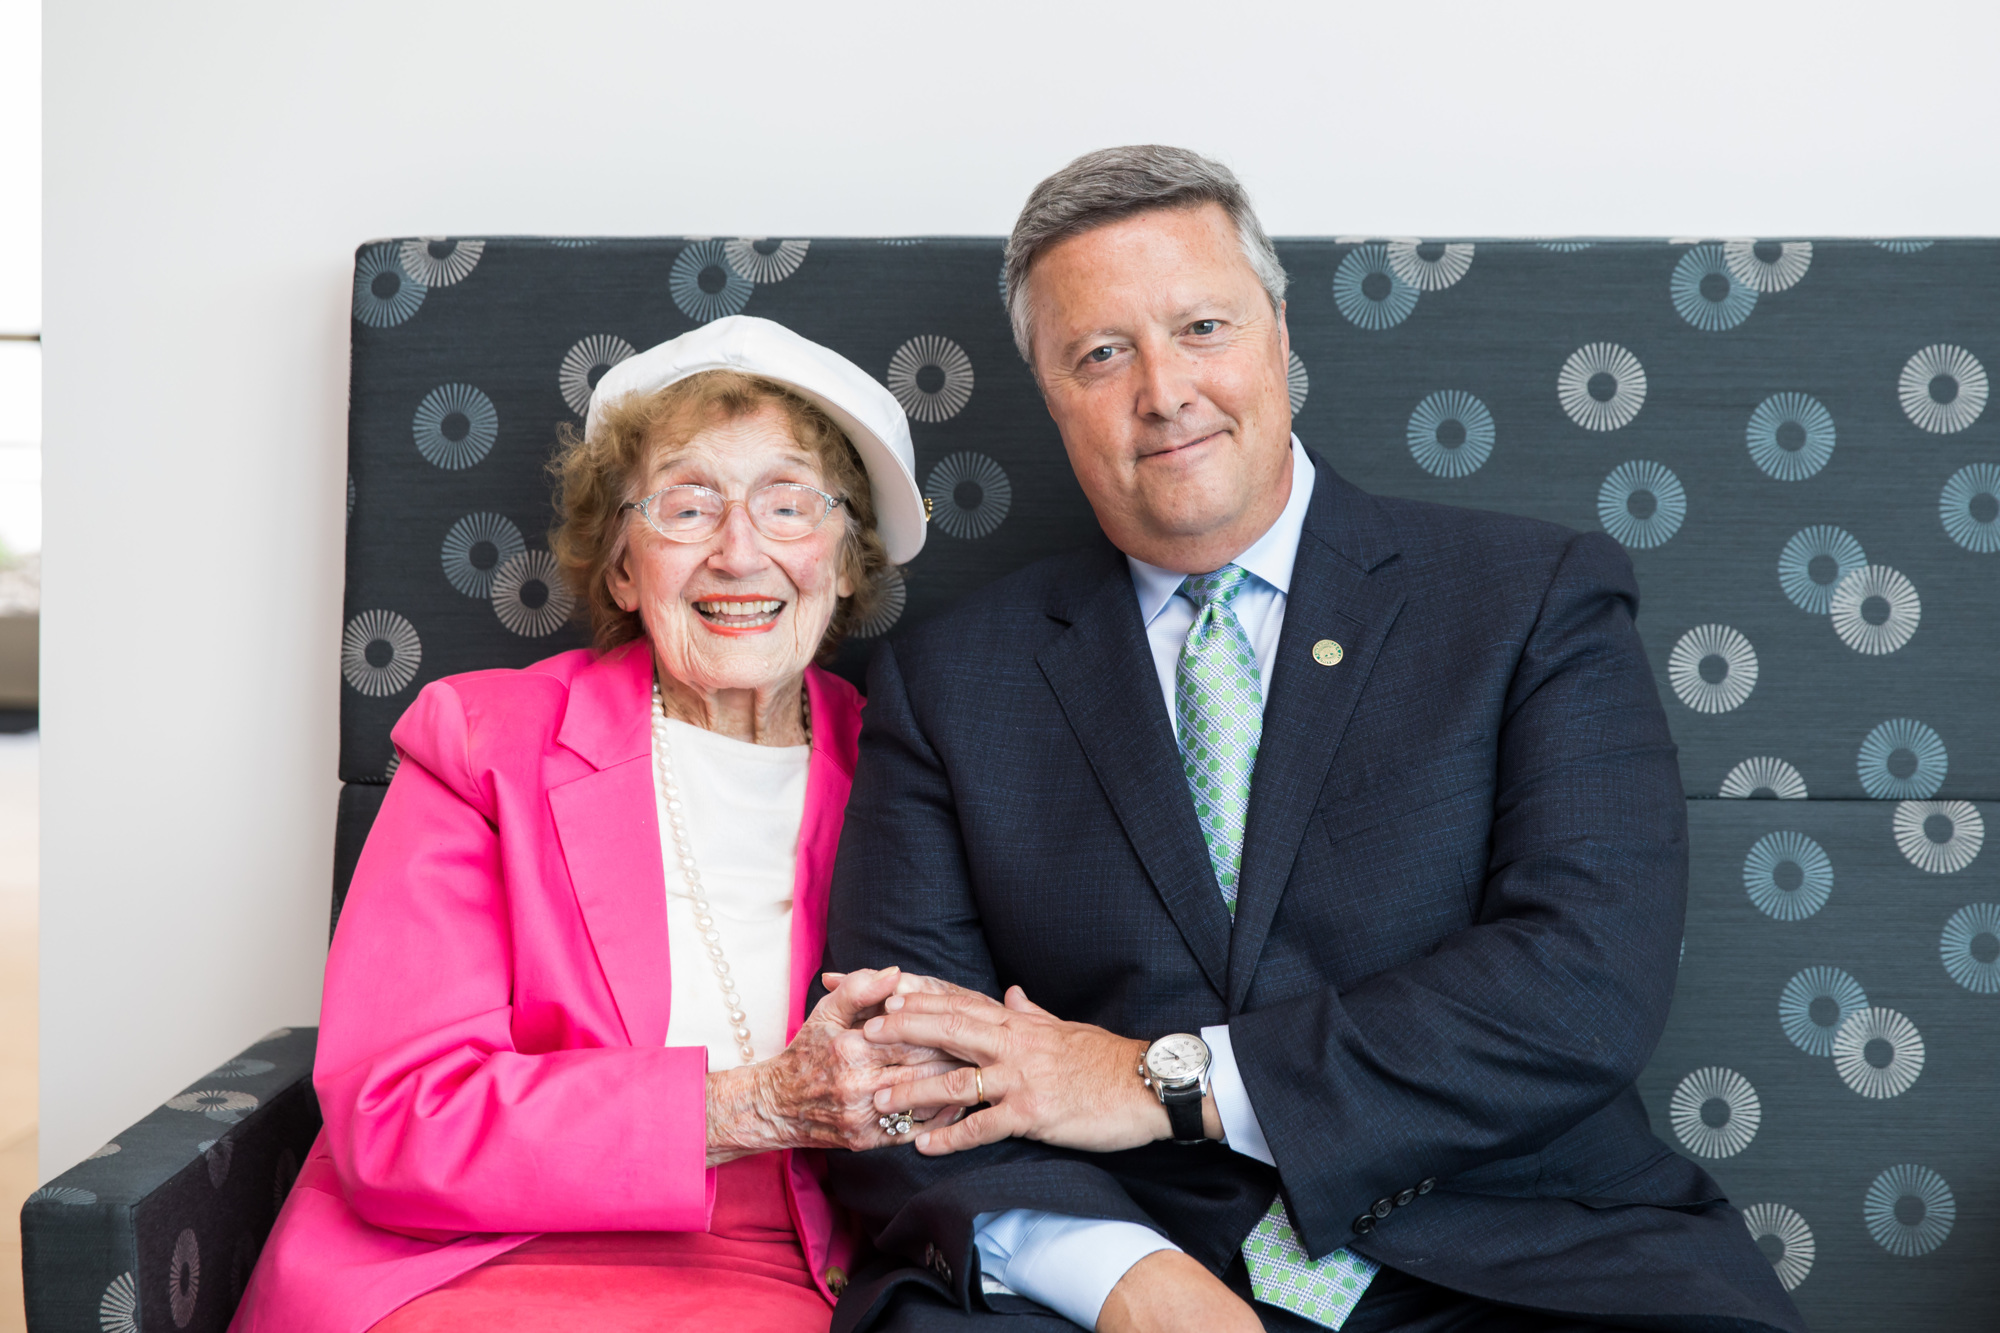 Fran Kinne and UF President Tim Cost at the Frances Bartlett Kinne Welcome Gallery in the University’s Frisch Welcome Center in 2018.